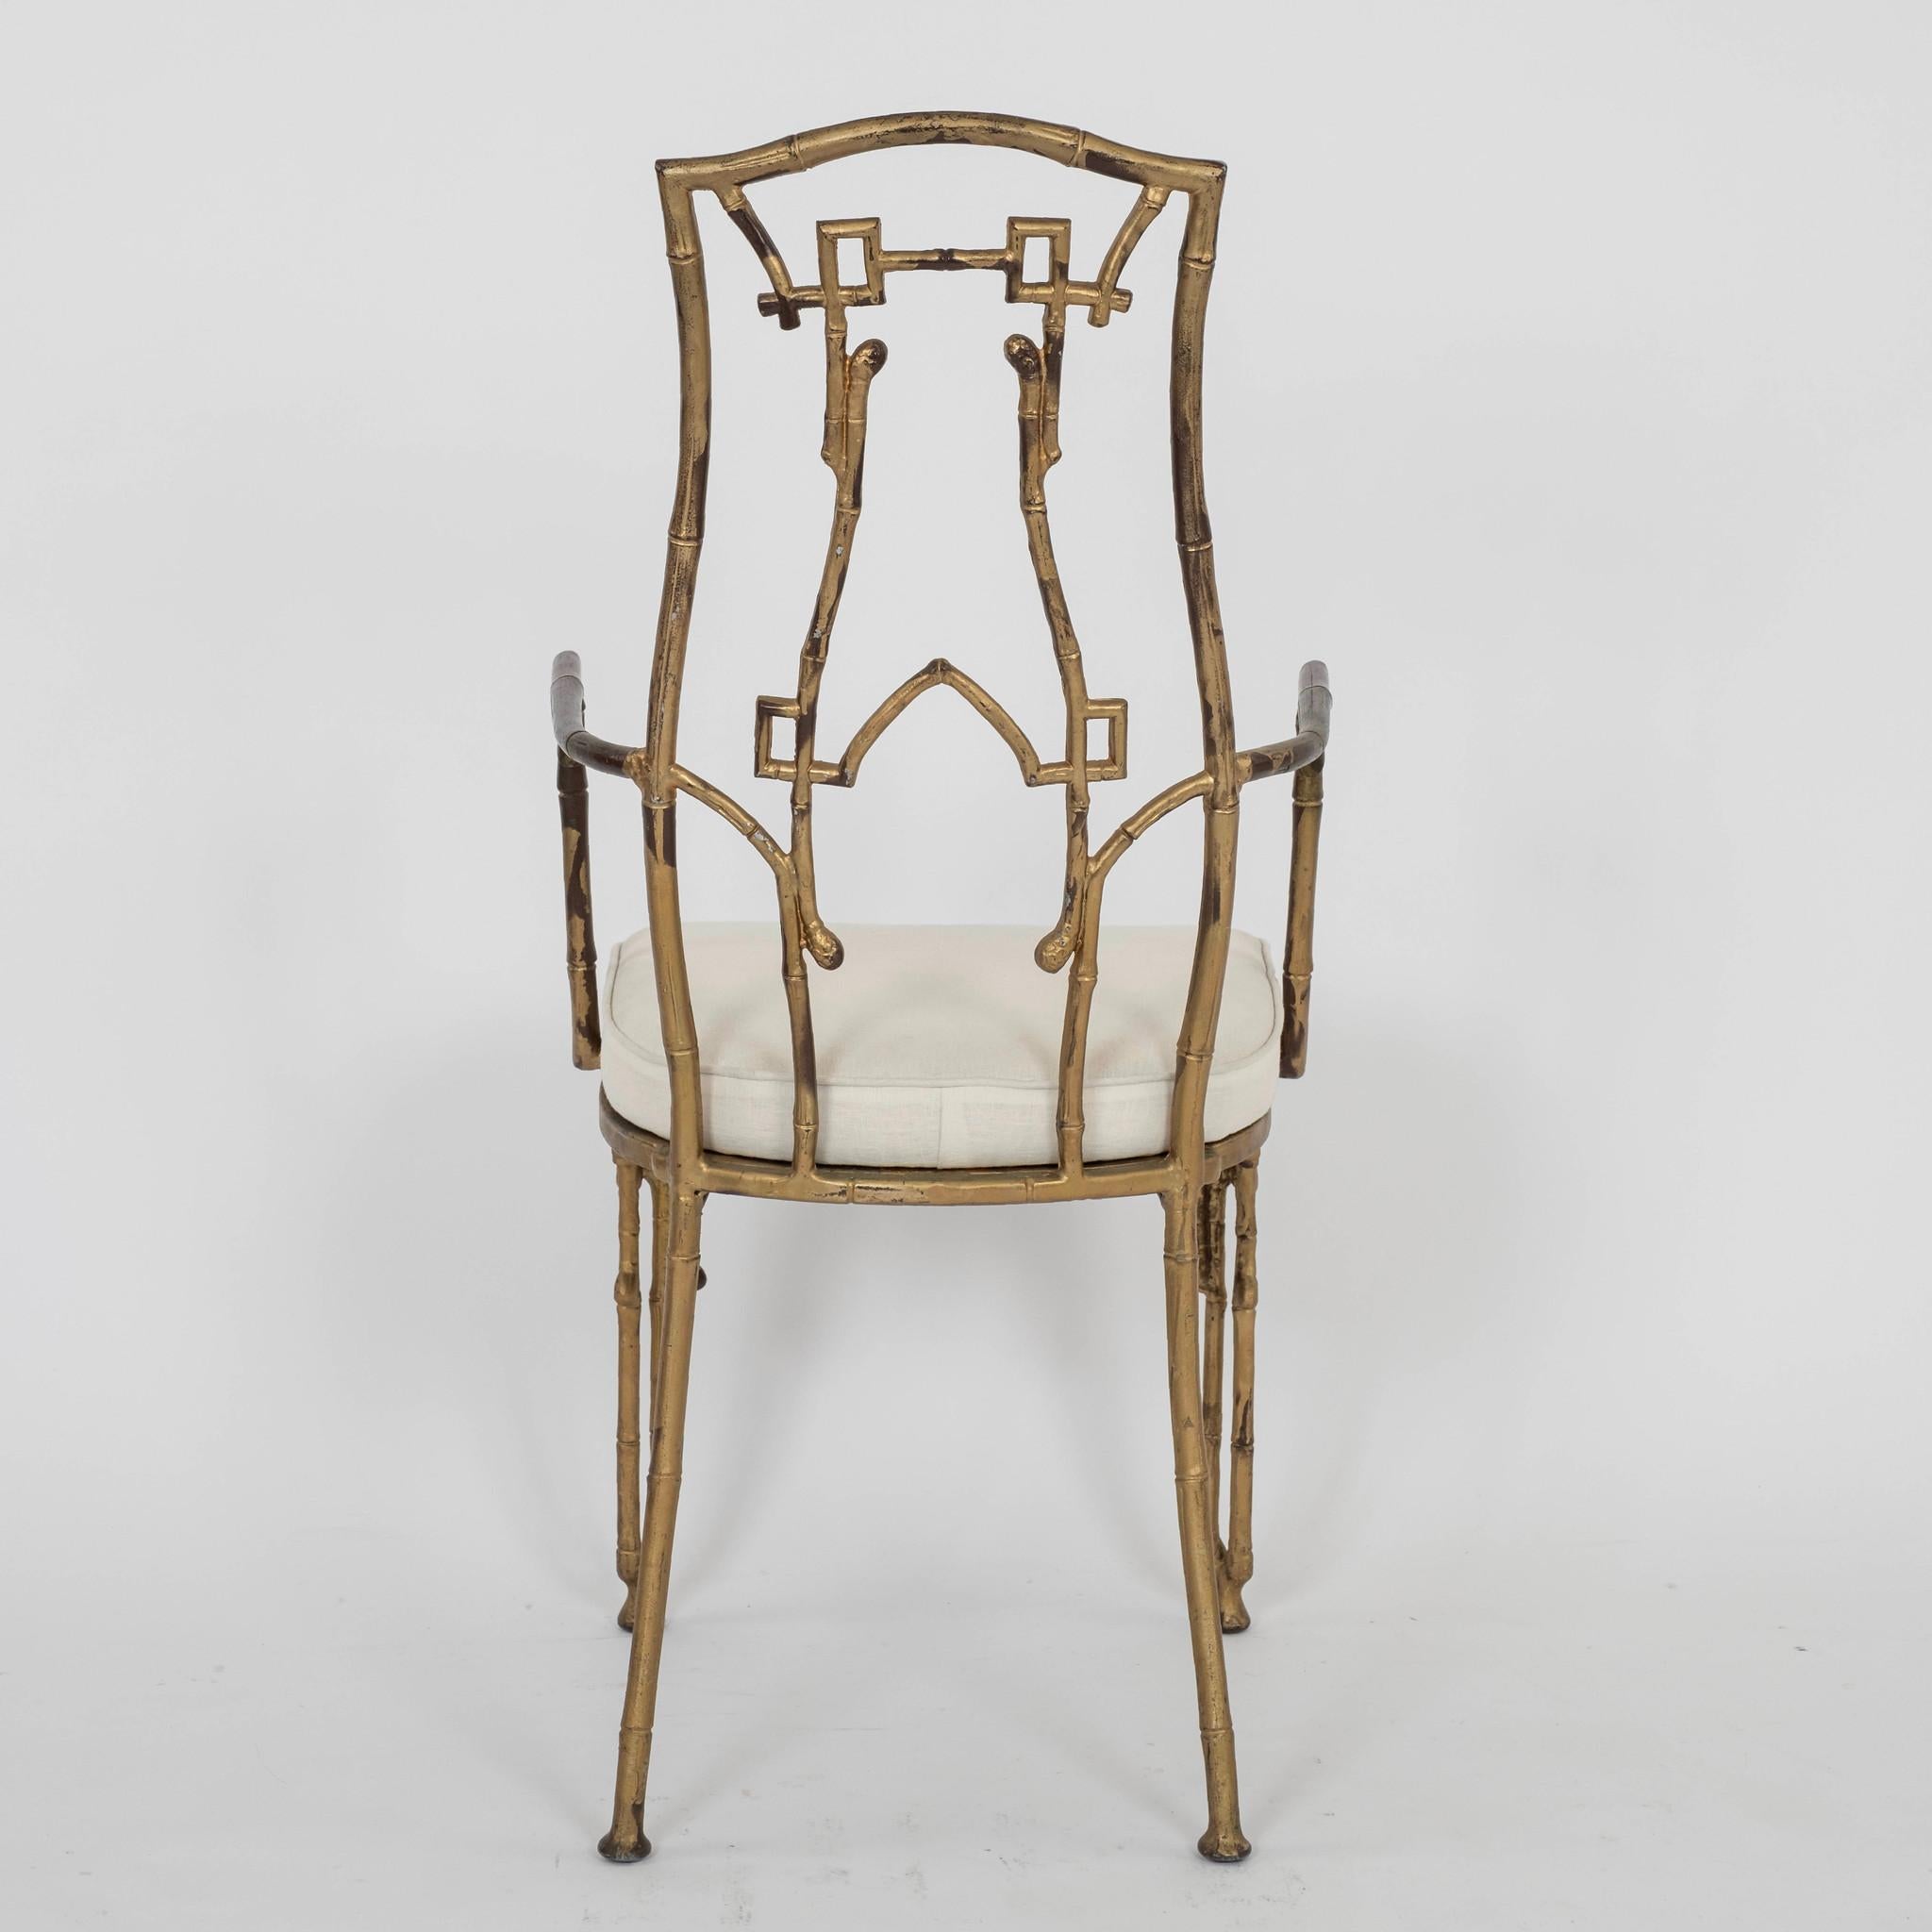 Aesthetic Bamboo Gilt Iron Arm Chair In Distressed Condition For Sale In Houston, TX